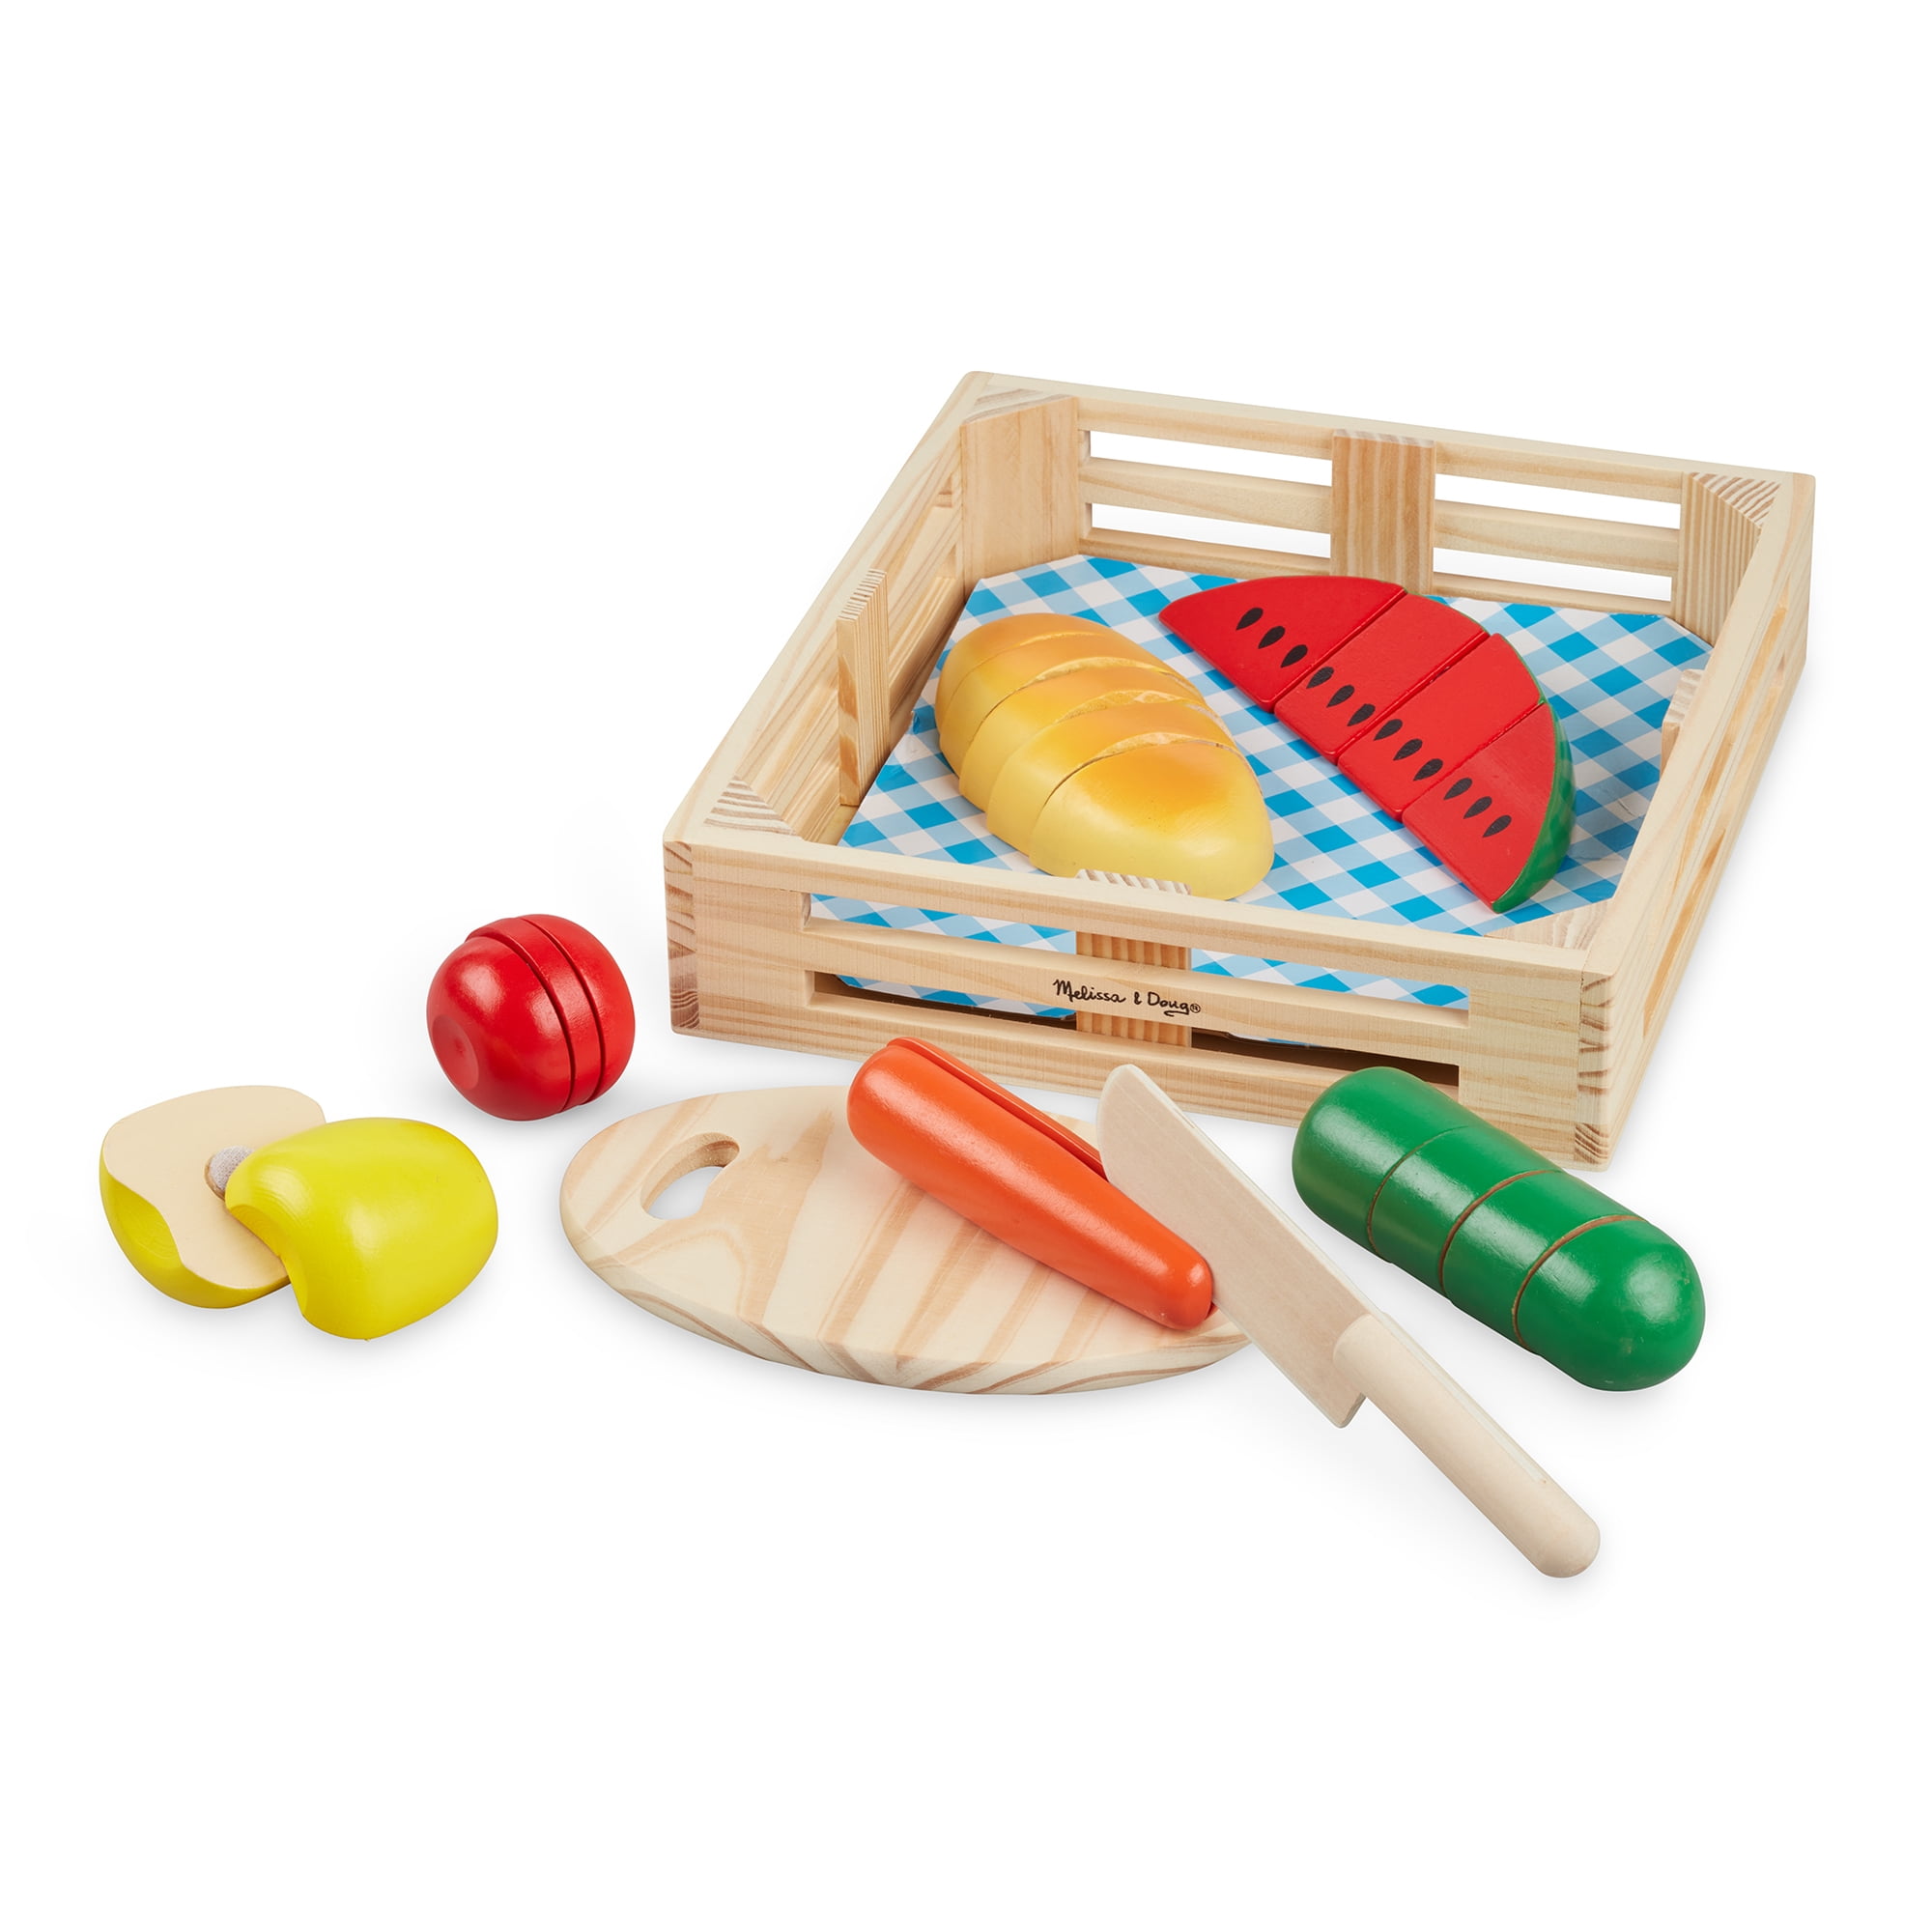 Wooden Cutting Fruit Food Fun Toys Kitchen Cooking Pretend Playset for Kids 